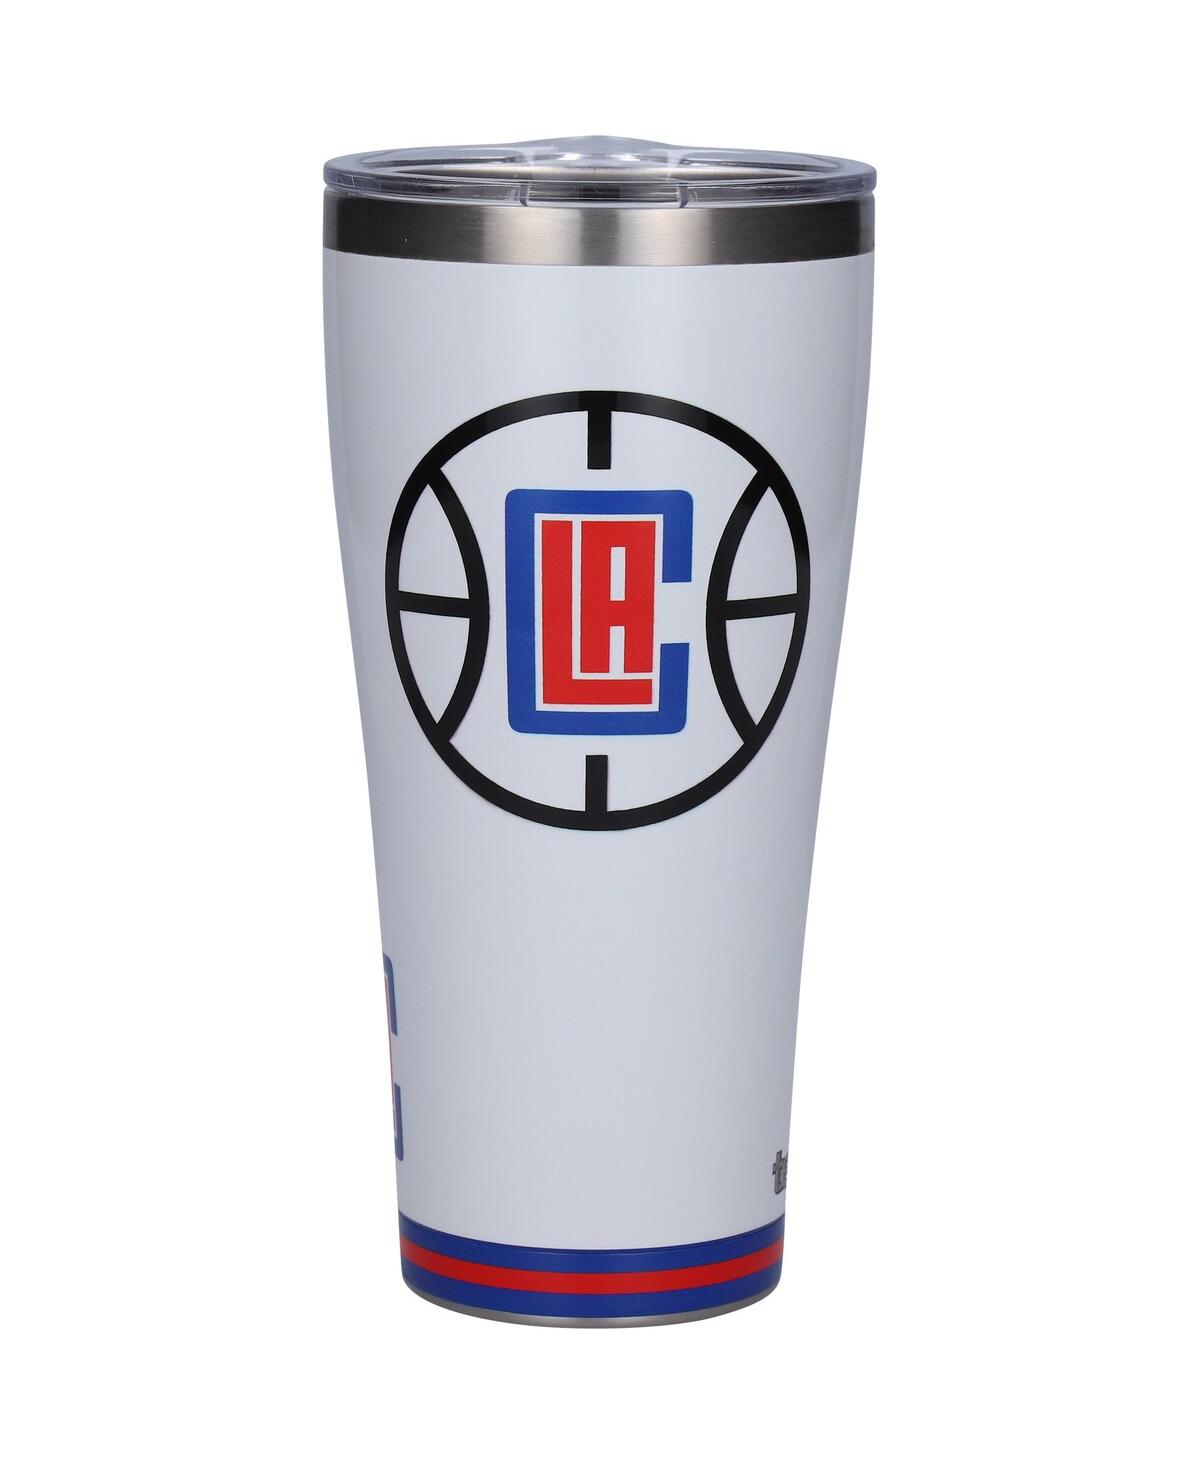 Tervis Tumbler La Clippers 30 oz Arctic Stainless Steel Tumbler In White